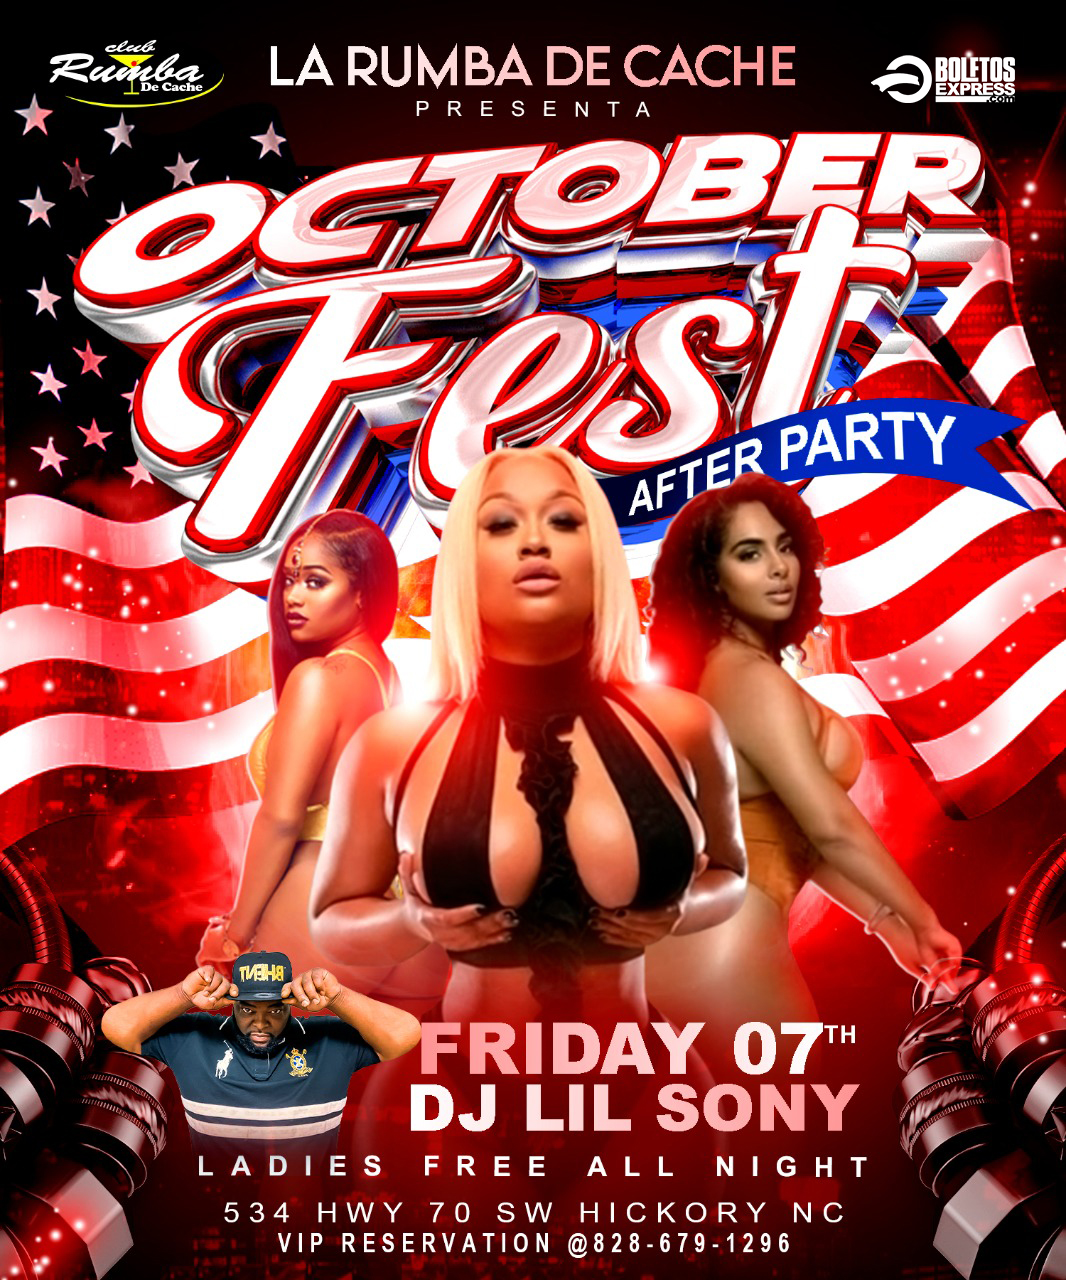 OCTOBER FEST AFTER PARTY